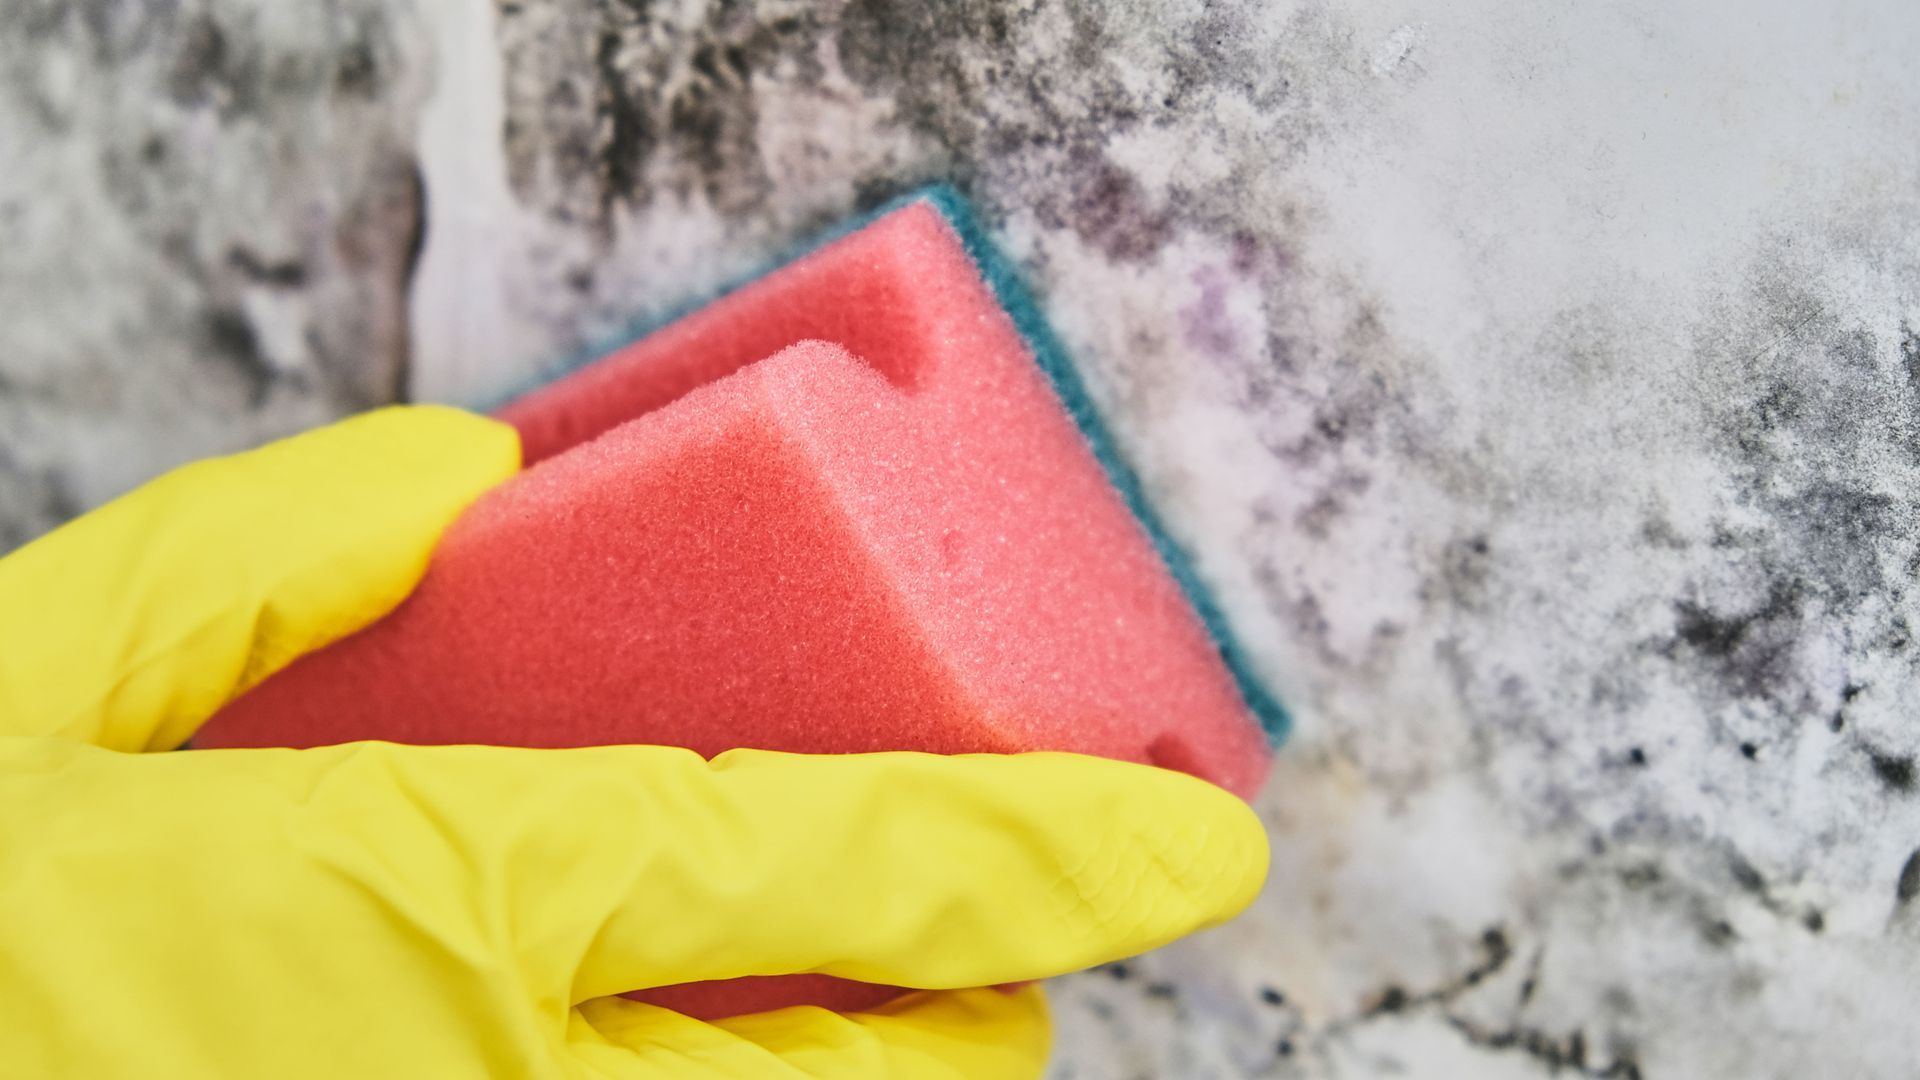 Mold removal services in Blaine, MN.